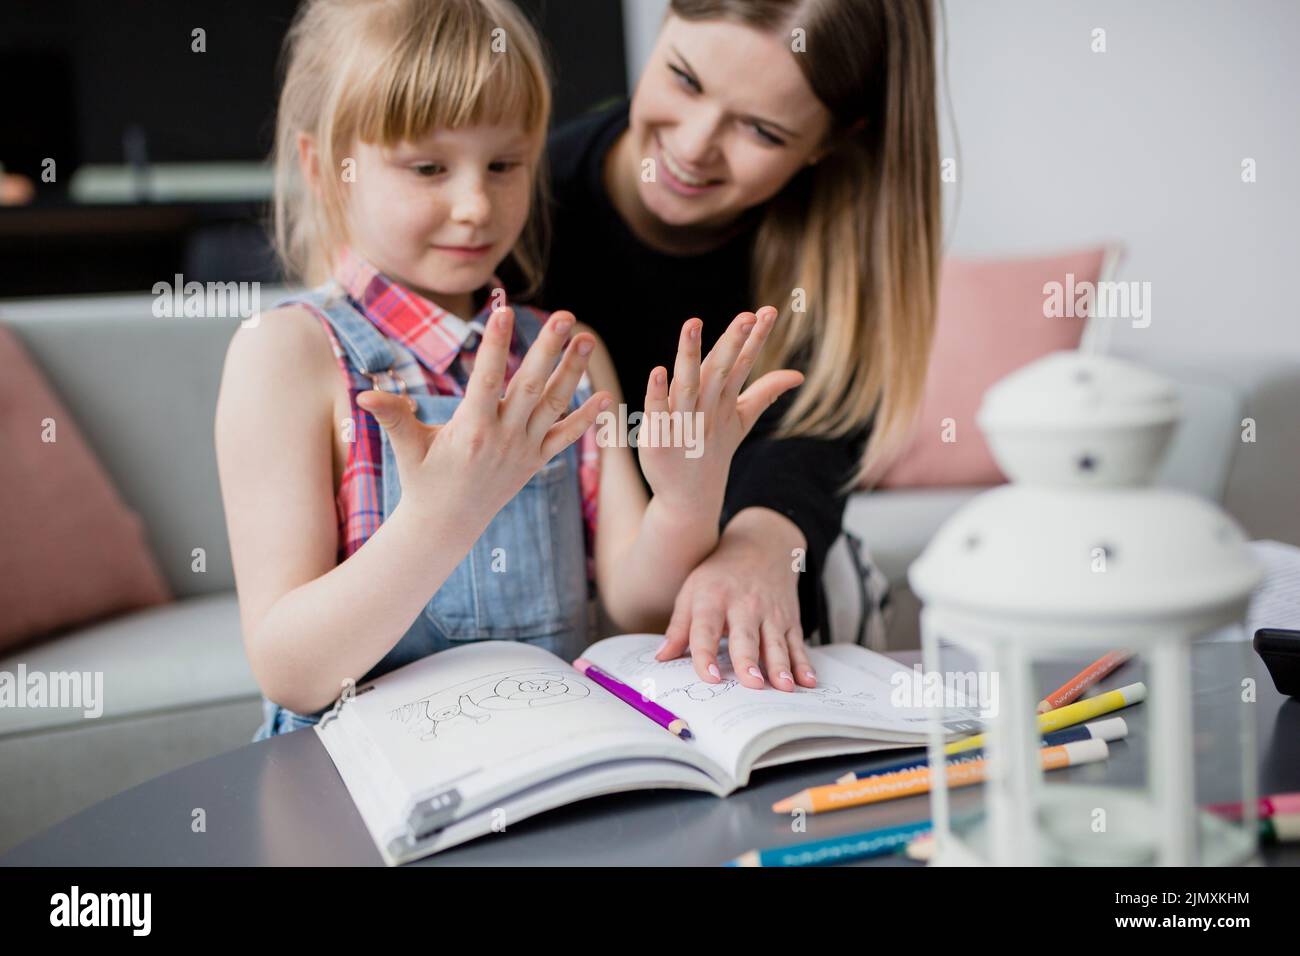 Girl looking hands while doing homework with mom Stock Photo